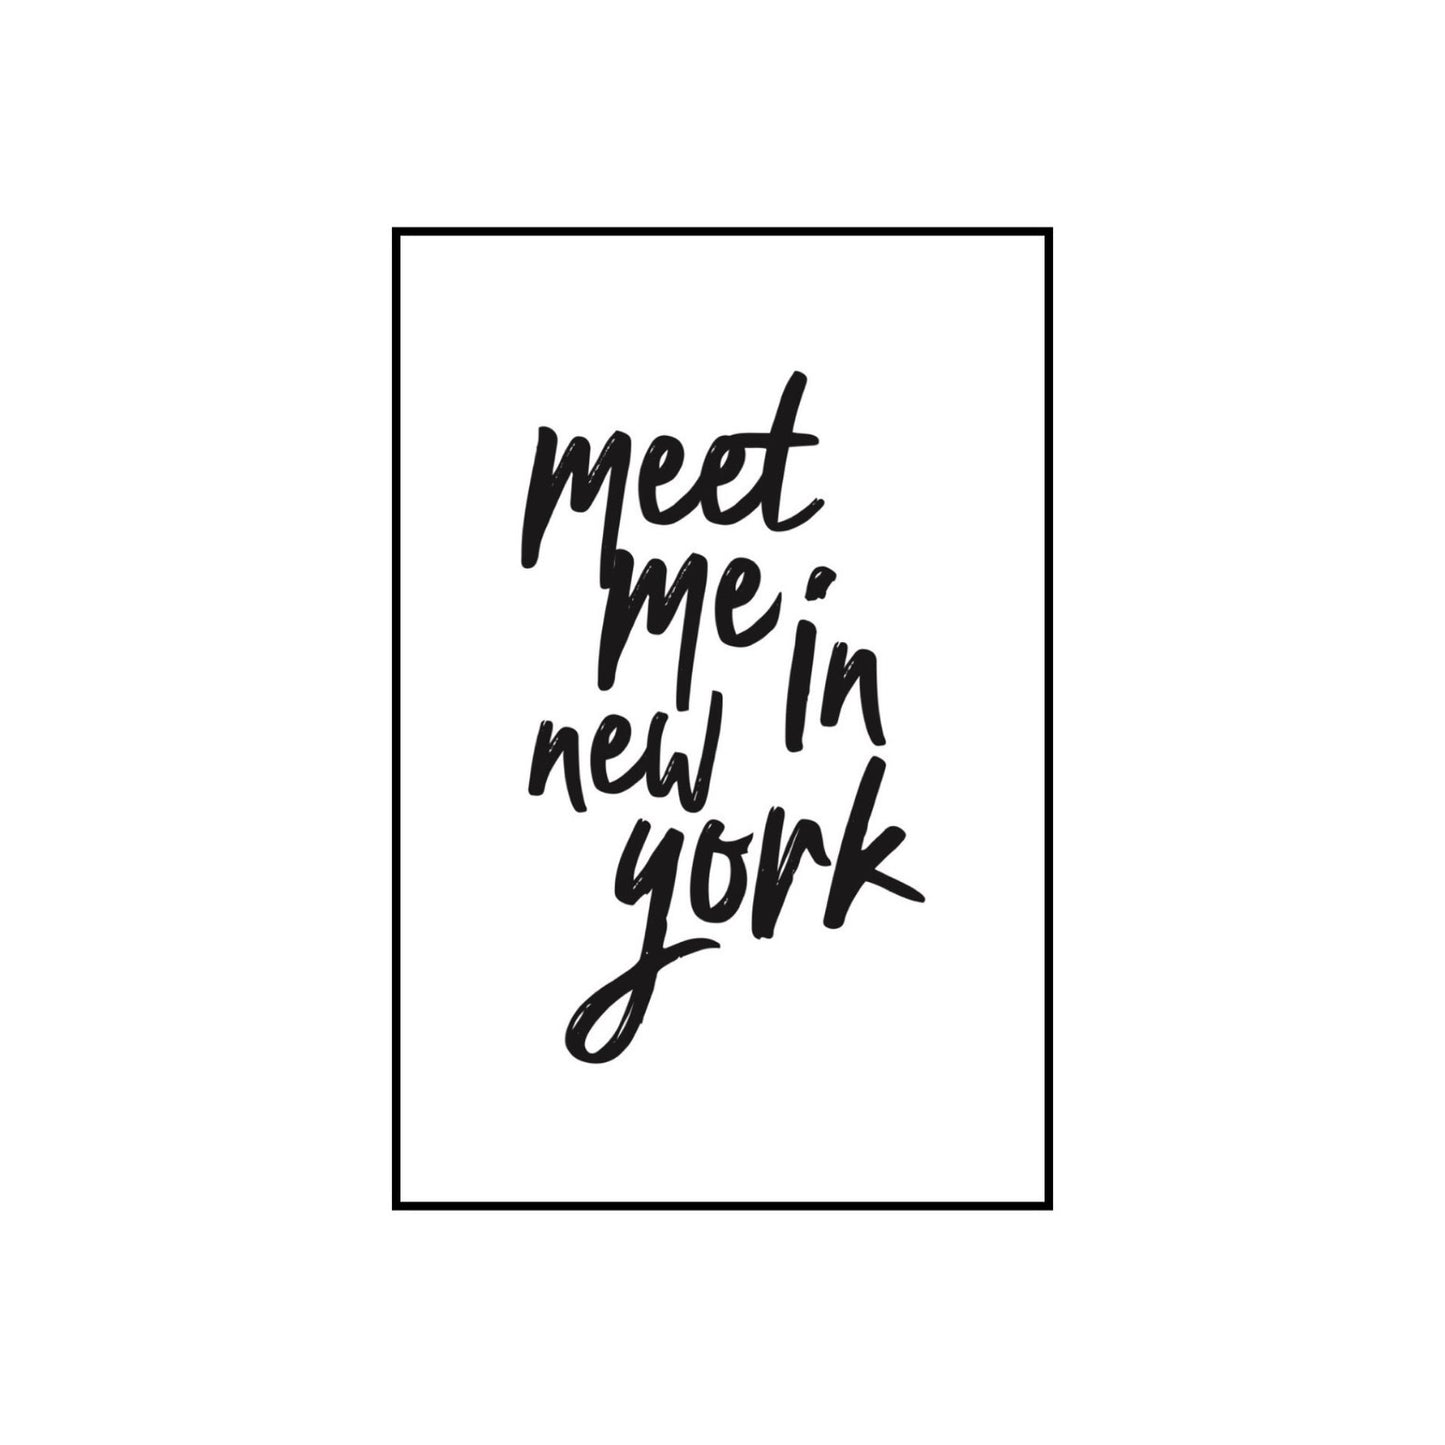 Meet me in New york - THE WALL STYLIST